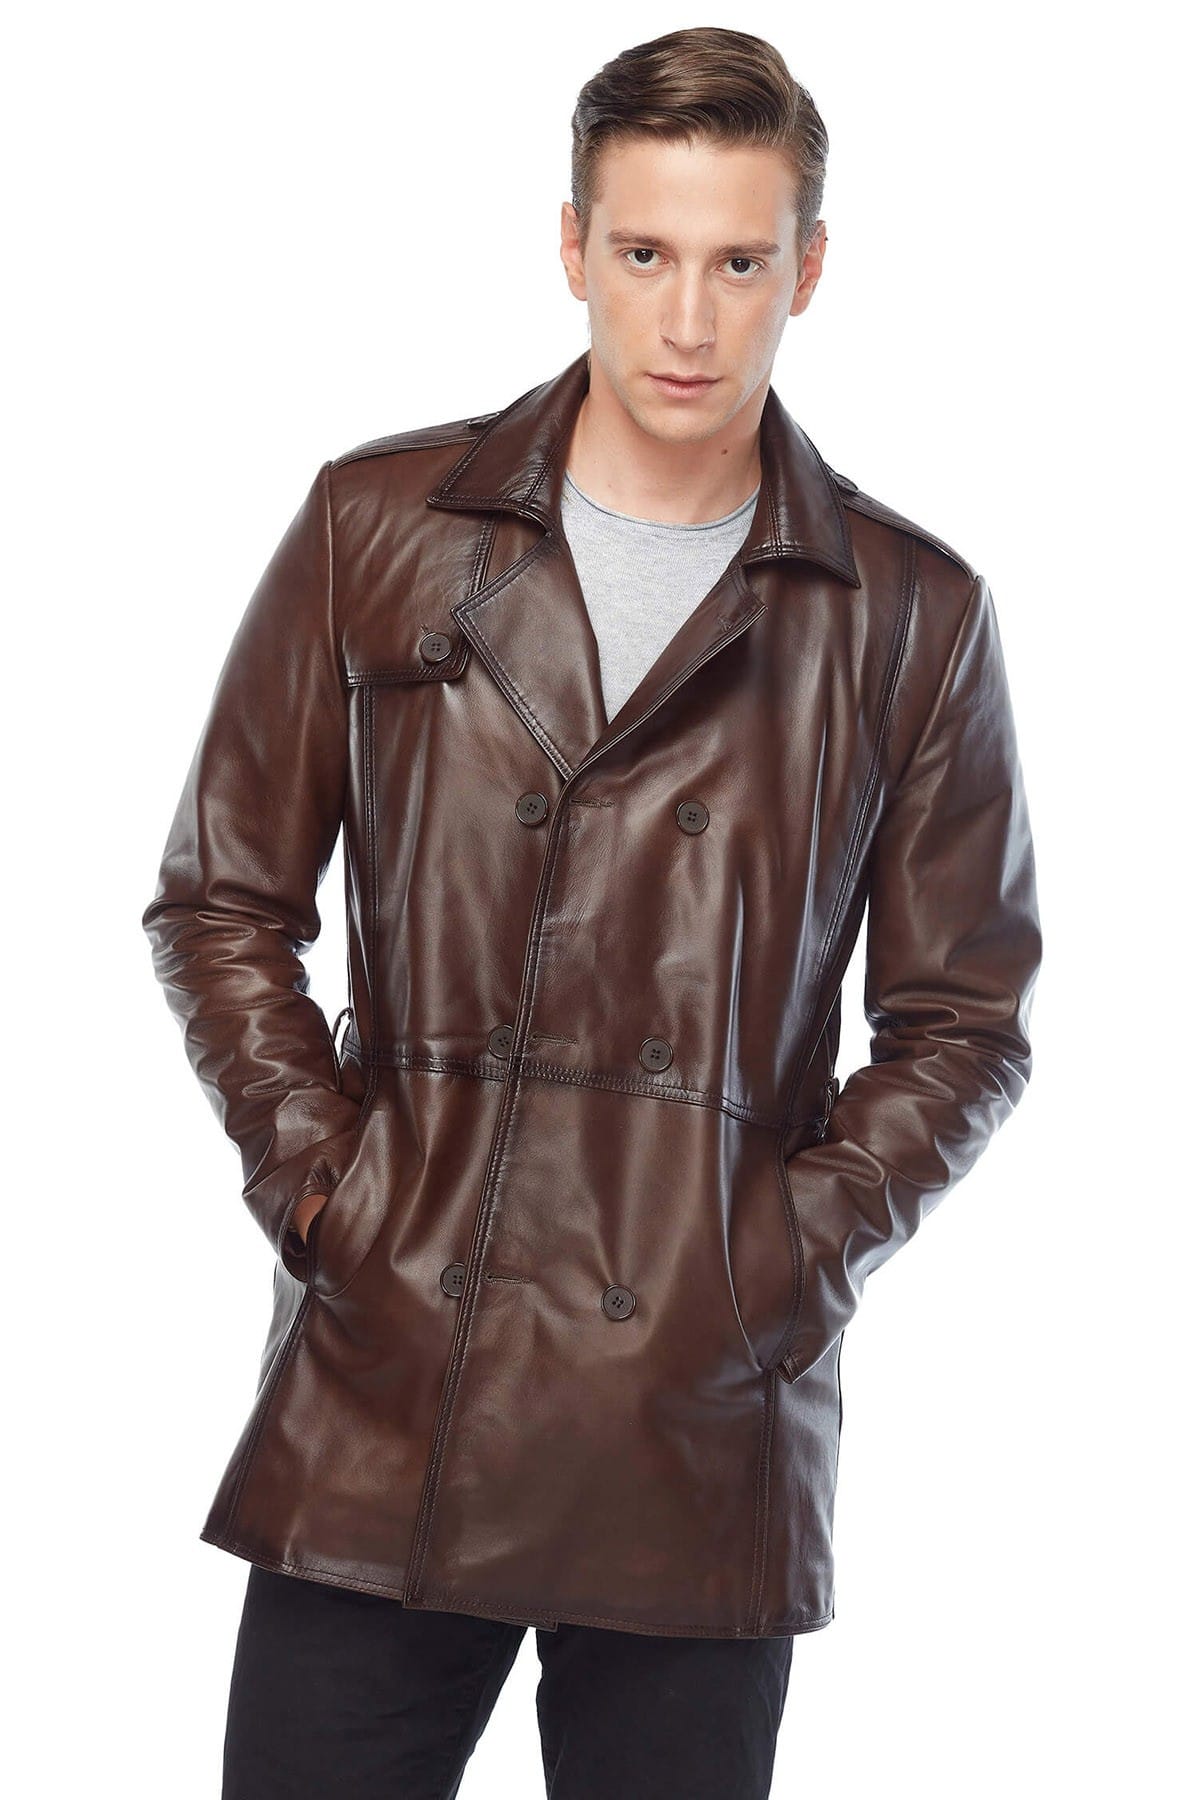 Antonio Banderas Real Leather Brown Trench Coat Pose